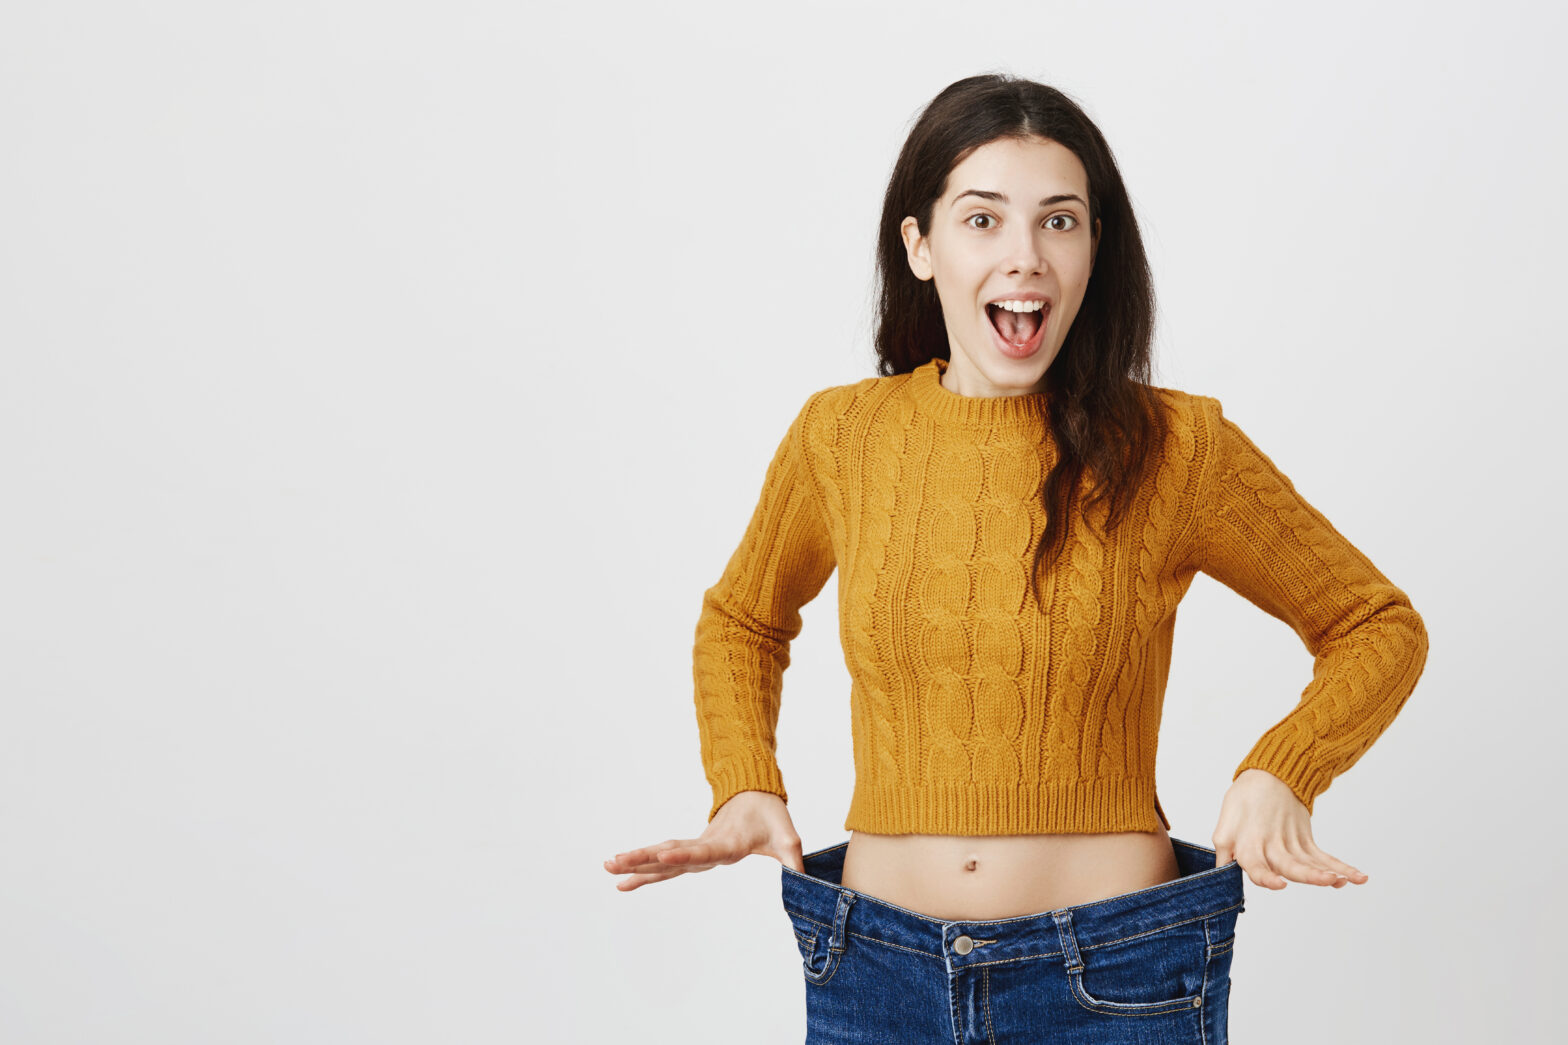 Astonished and happy young lady being impressed and excited because of losing weight, showing empty space in jeans by stretching it, standing over gray background. Girl is ready for summer